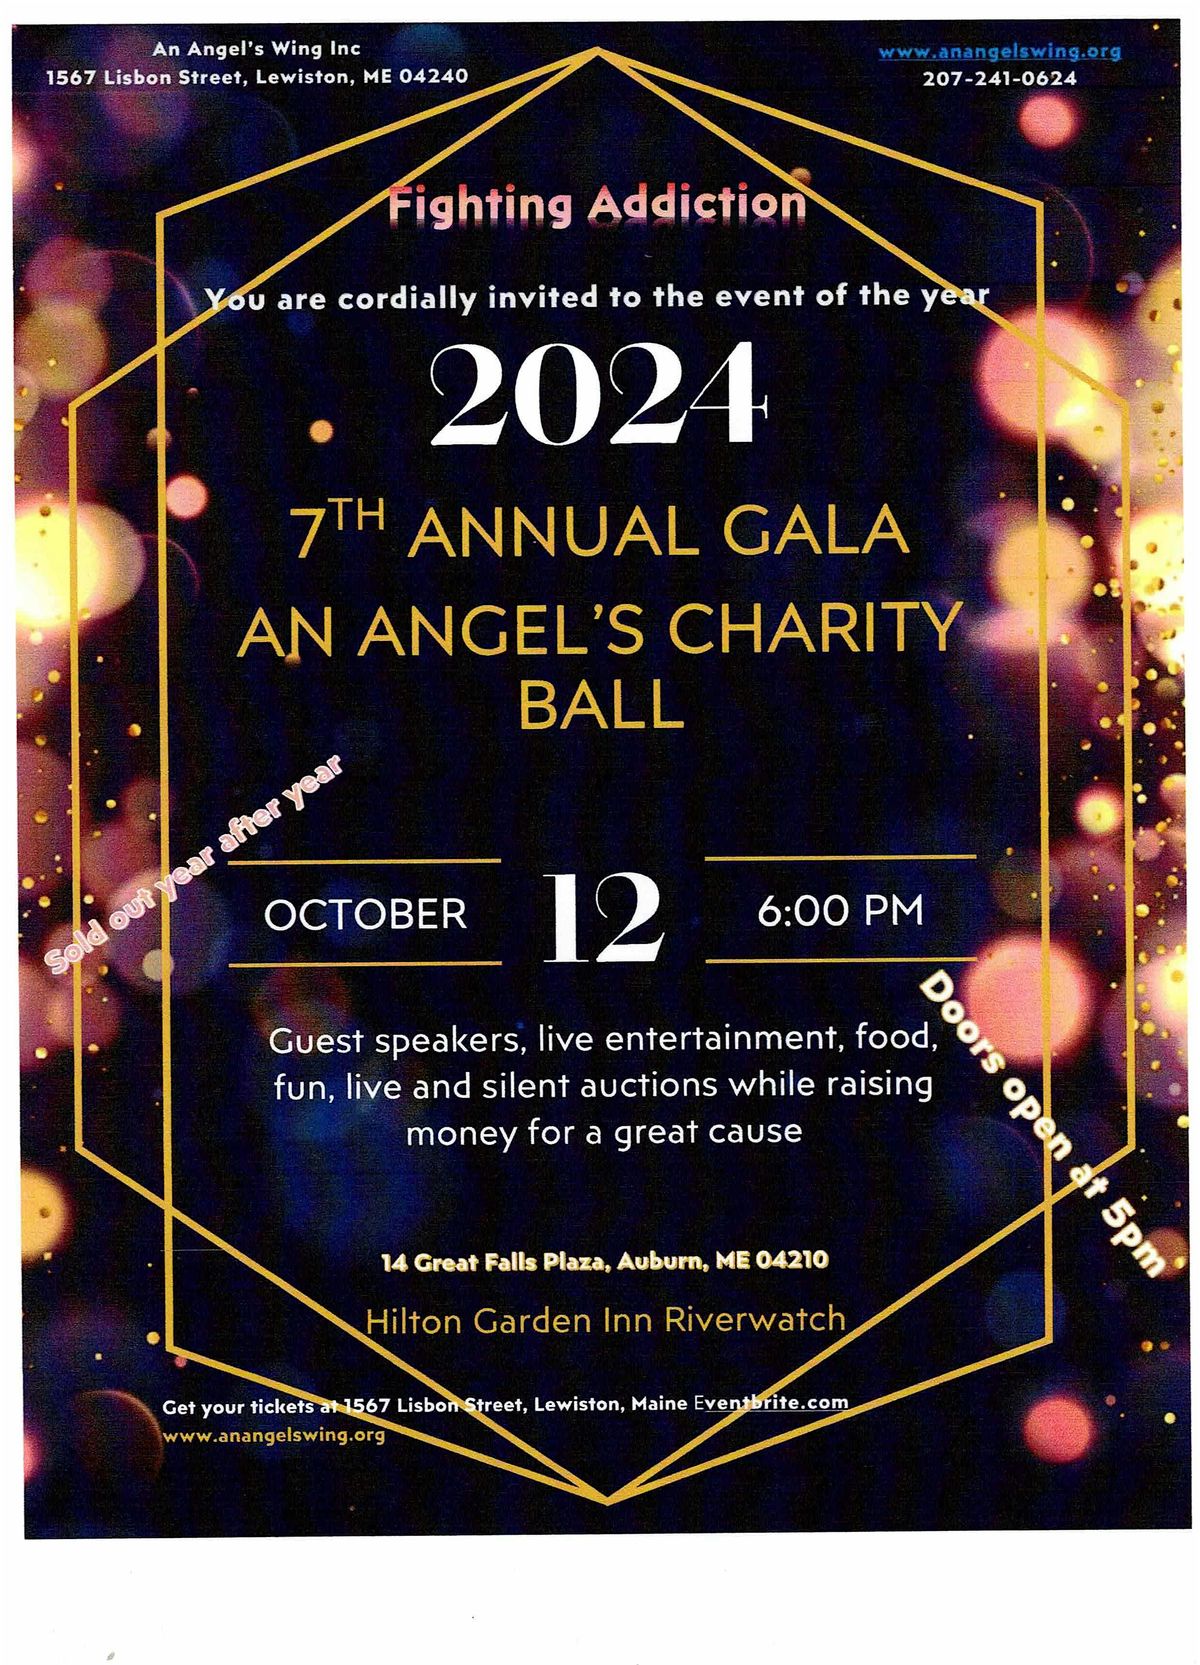 An Angel's Wing Charity Ball